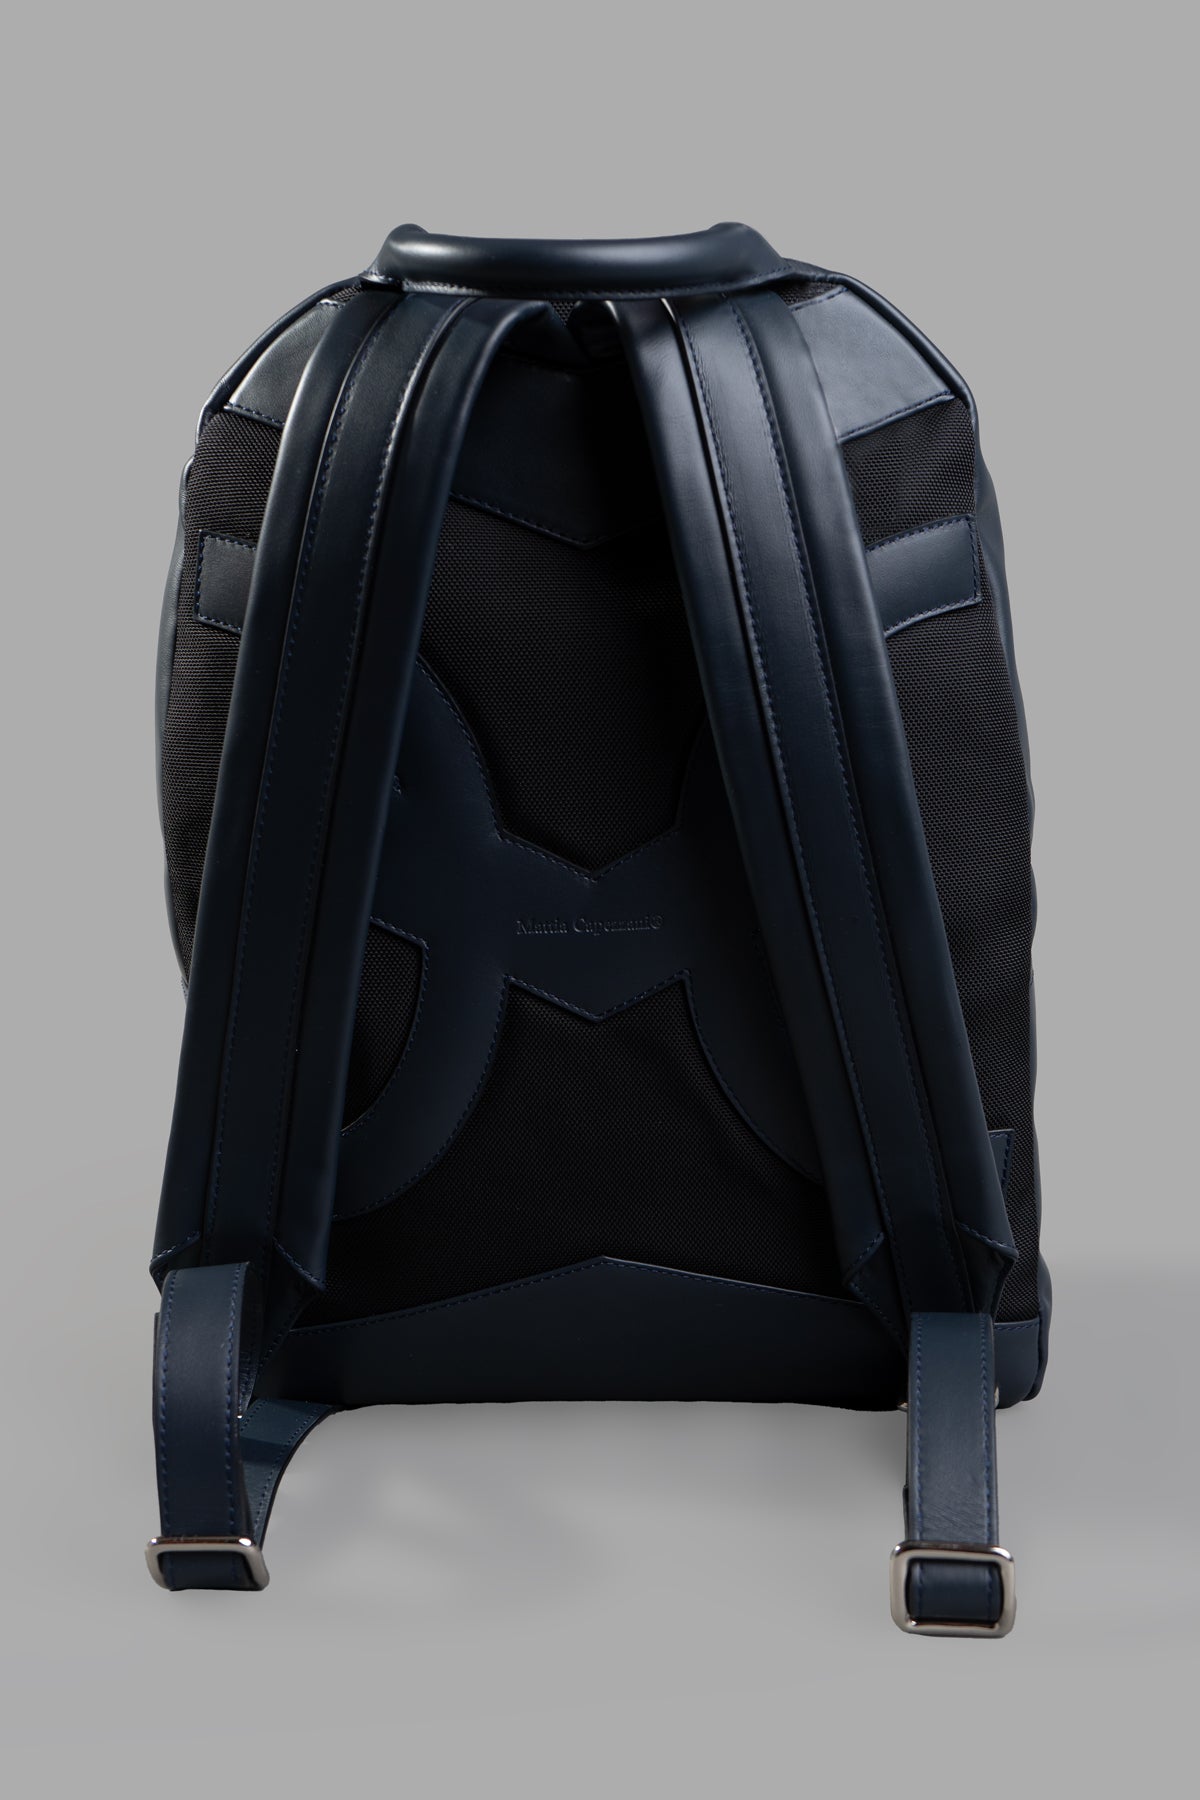 Navy Leather Backpack